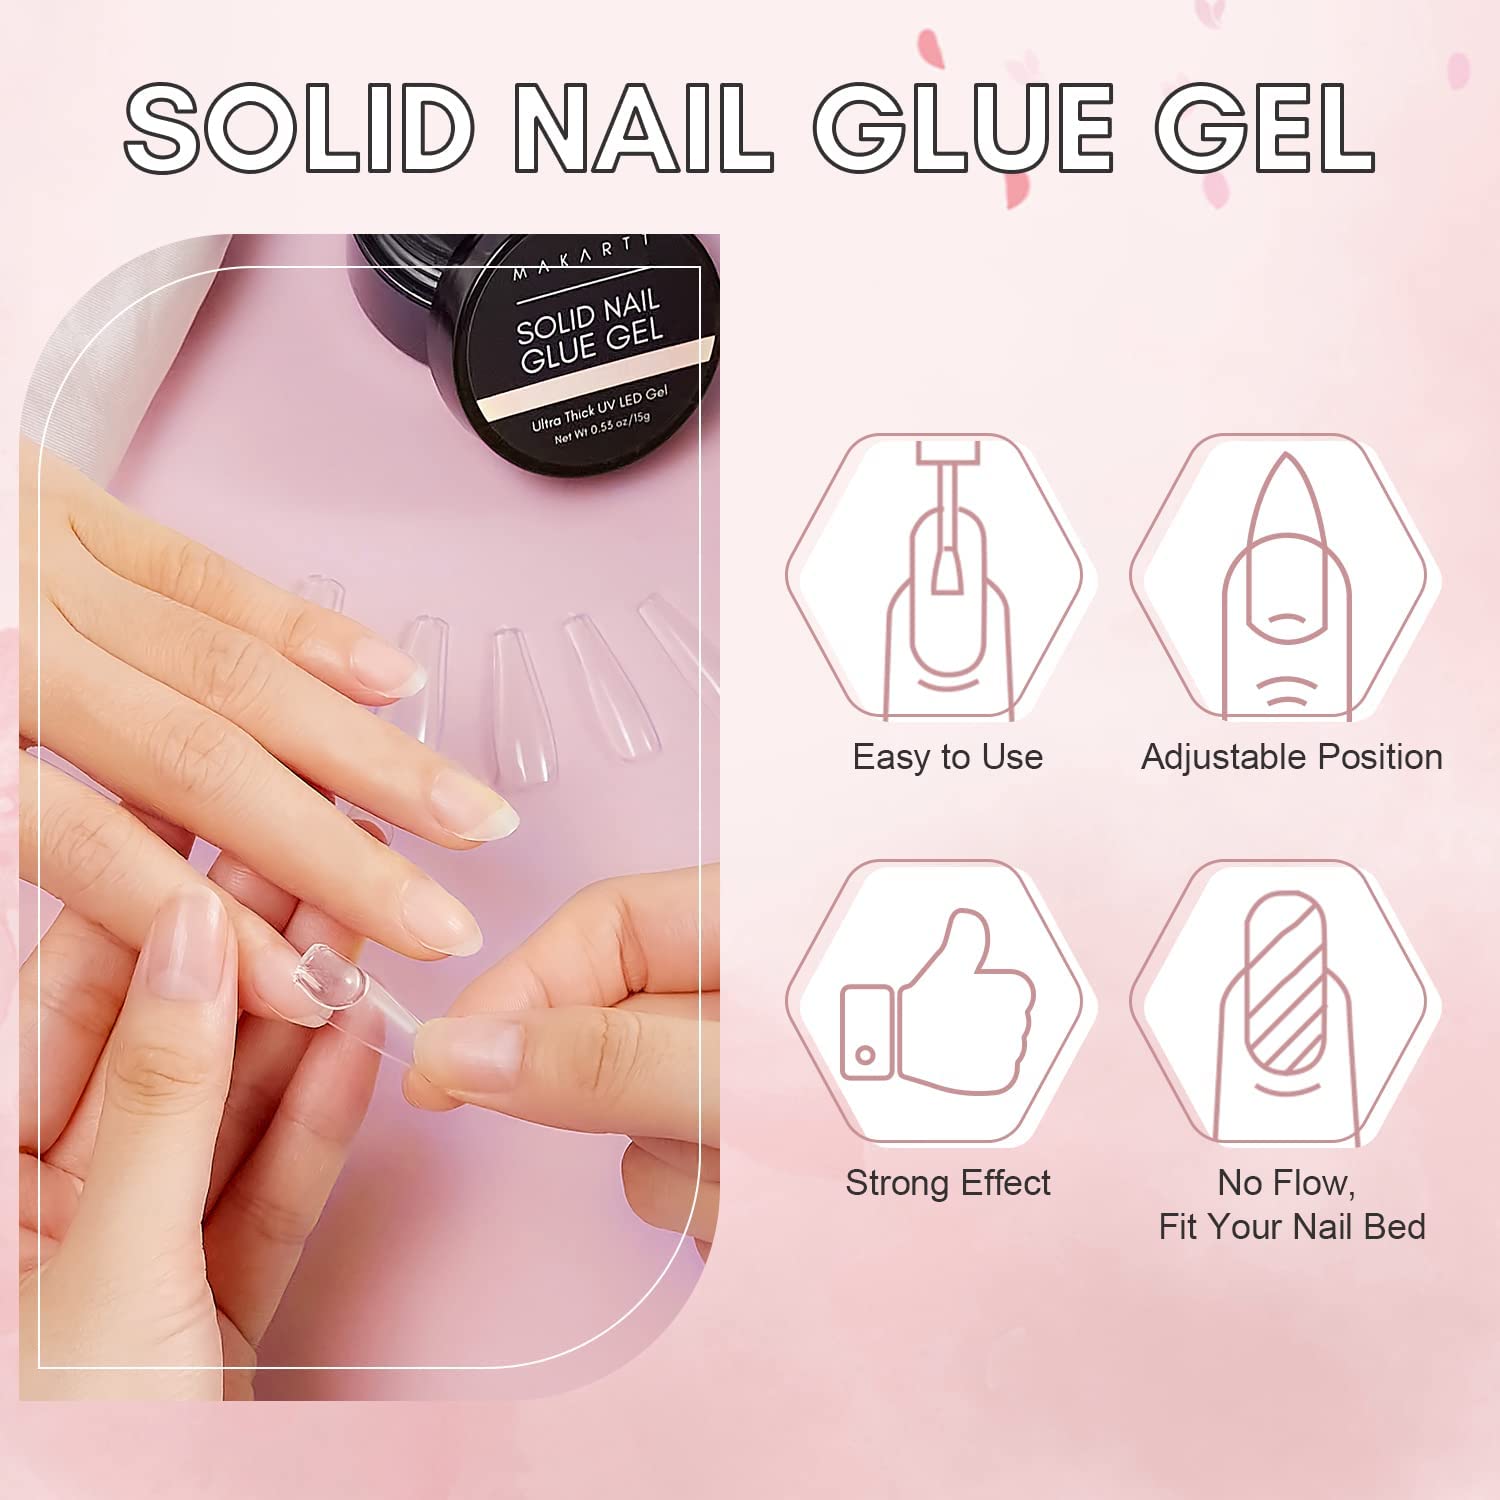 Solid Nail Gel Glue for Soft Gel Nail Tips - Clear 15g